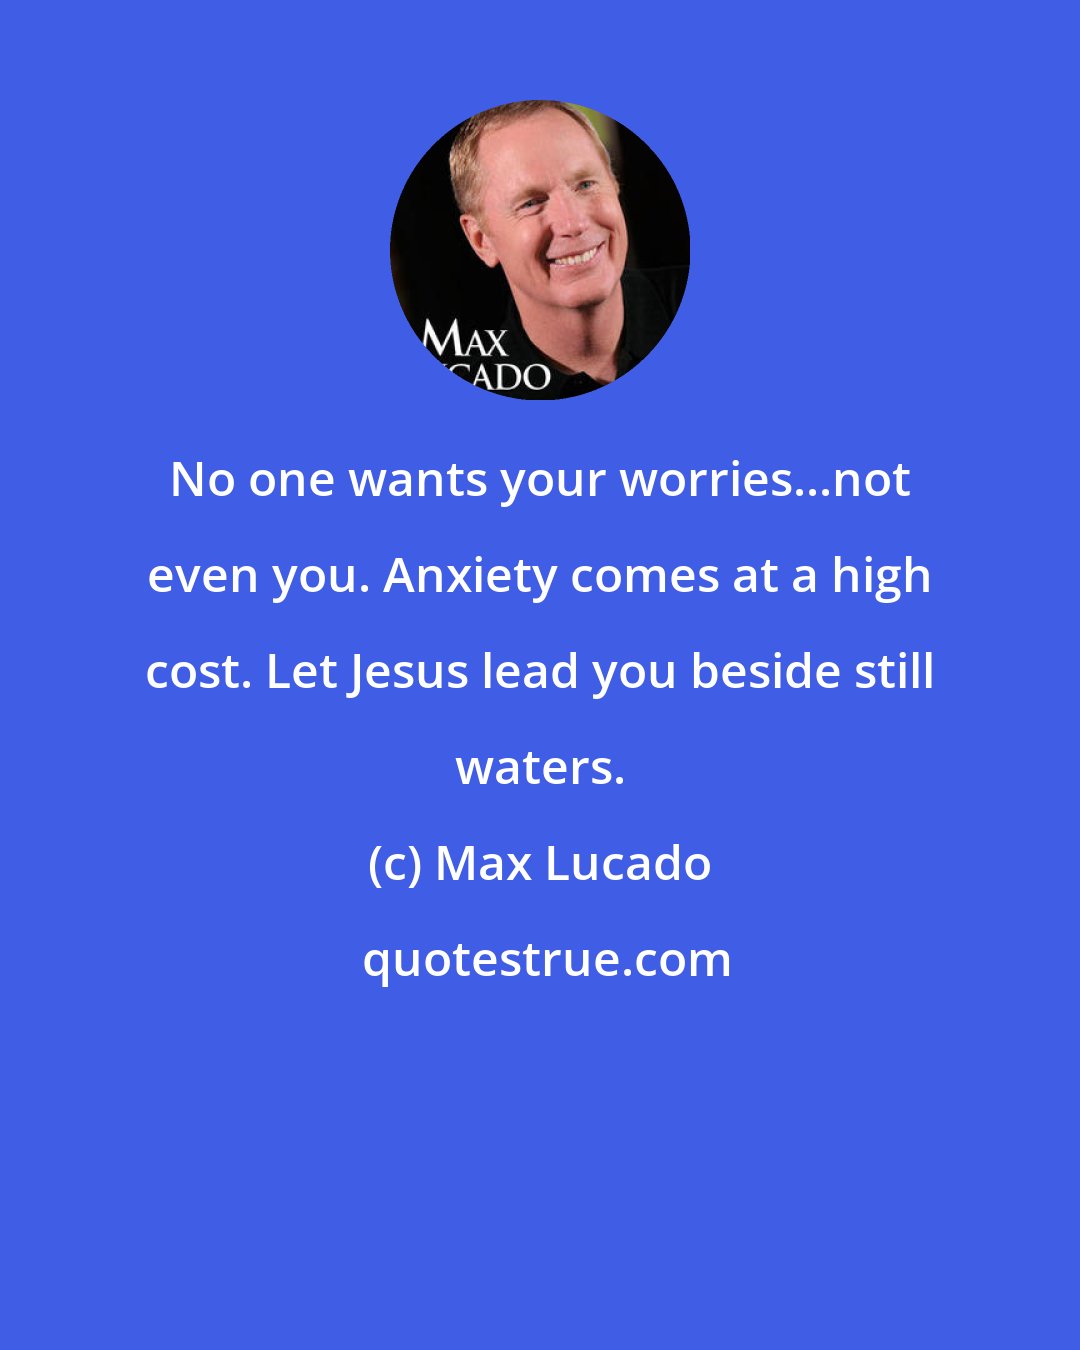 Max Lucado: No one wants your worries...not even you. Anxiety comes at a high cost. Let Jesus lead you beside still waters.